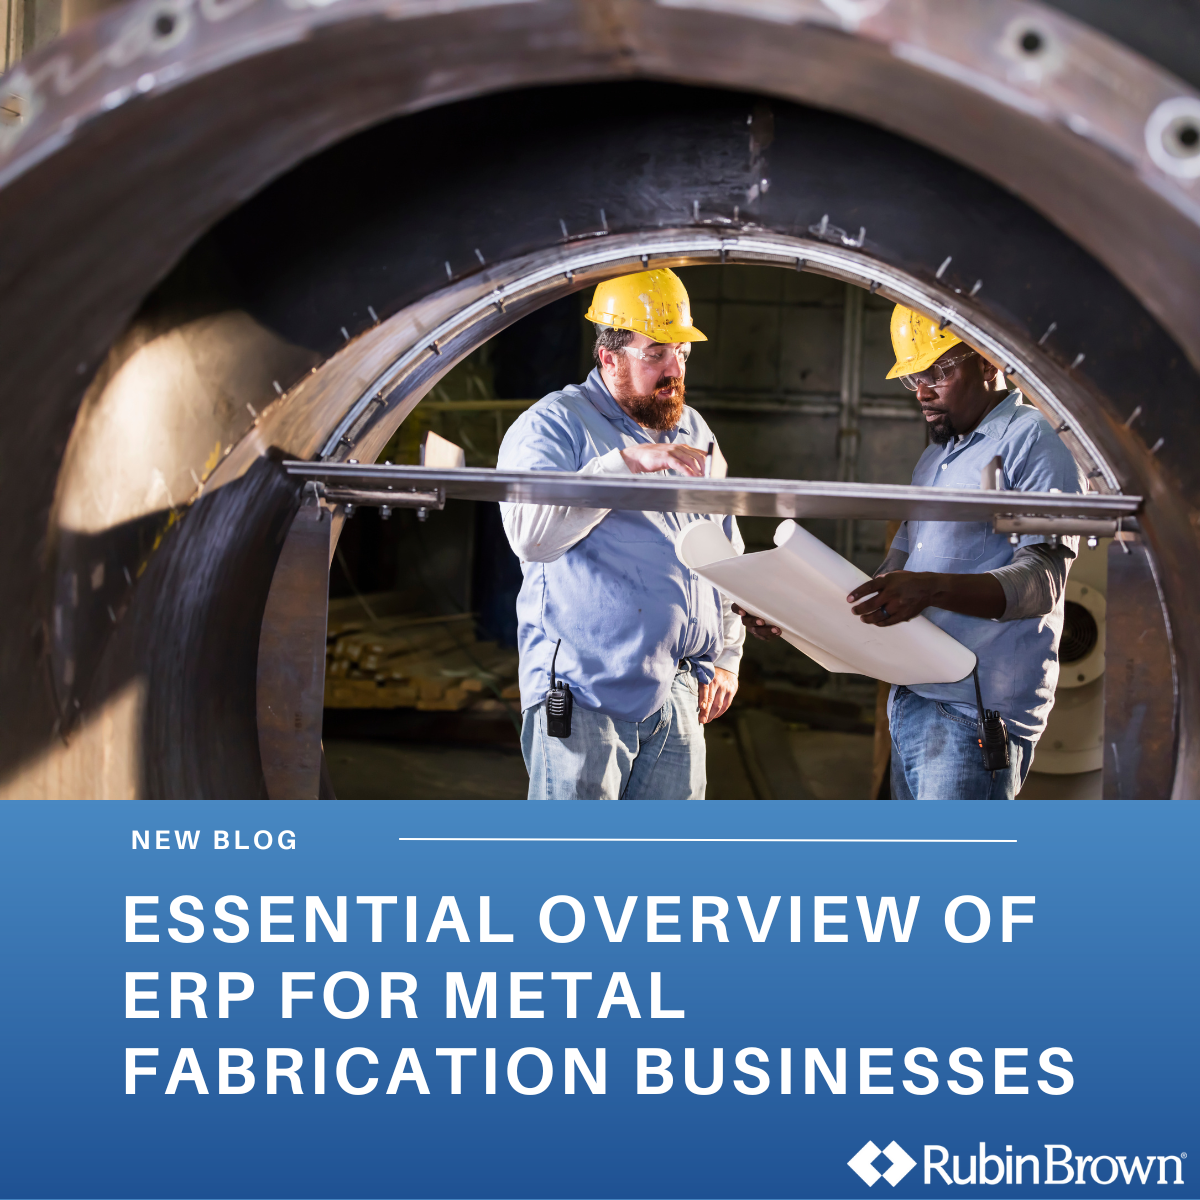 Essential Overview of ERP for Metal Fabrication Businesses